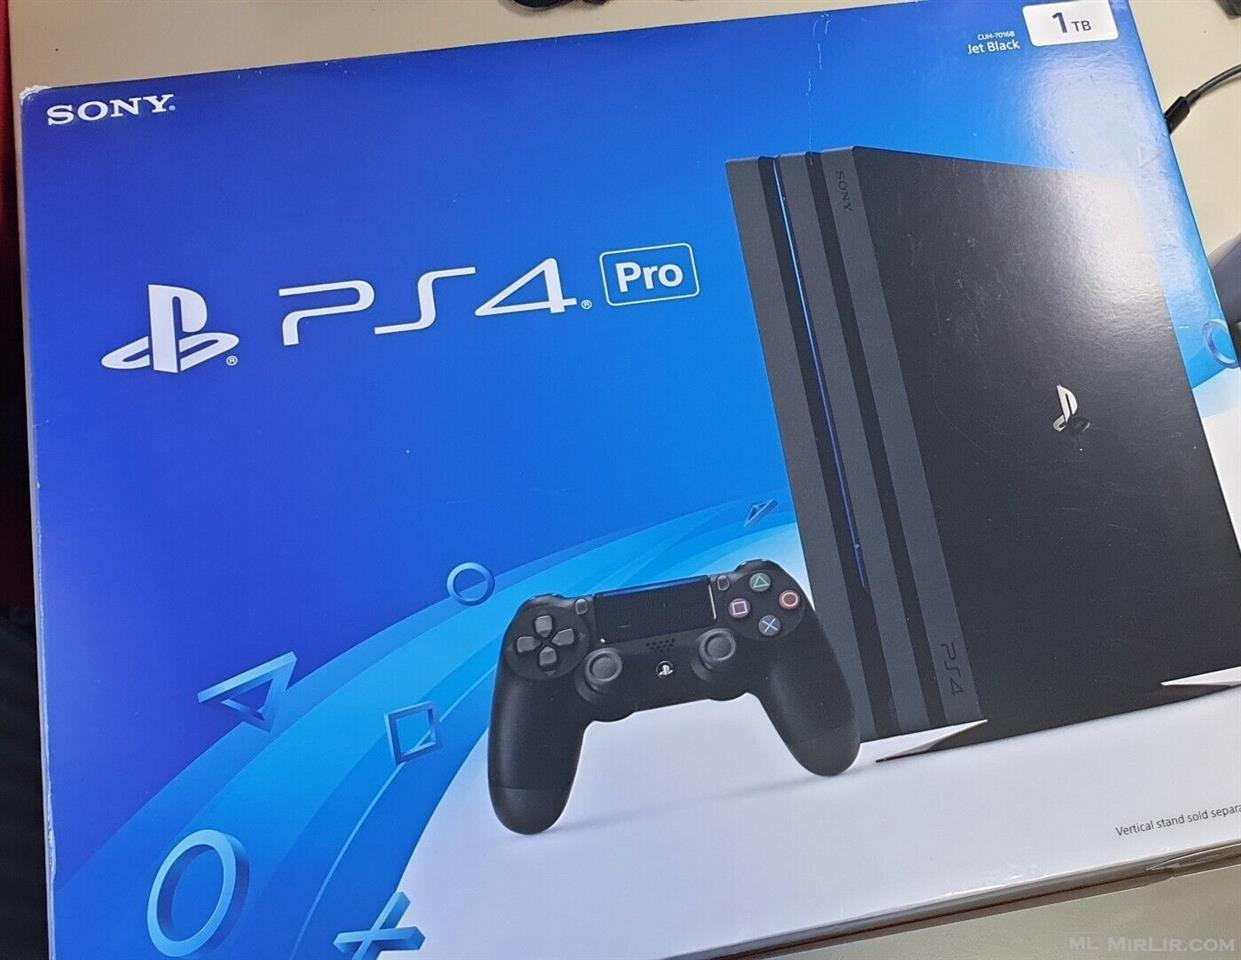 Sony PS4 PRO 1TB Console - Black + Controller + Vertical Sta